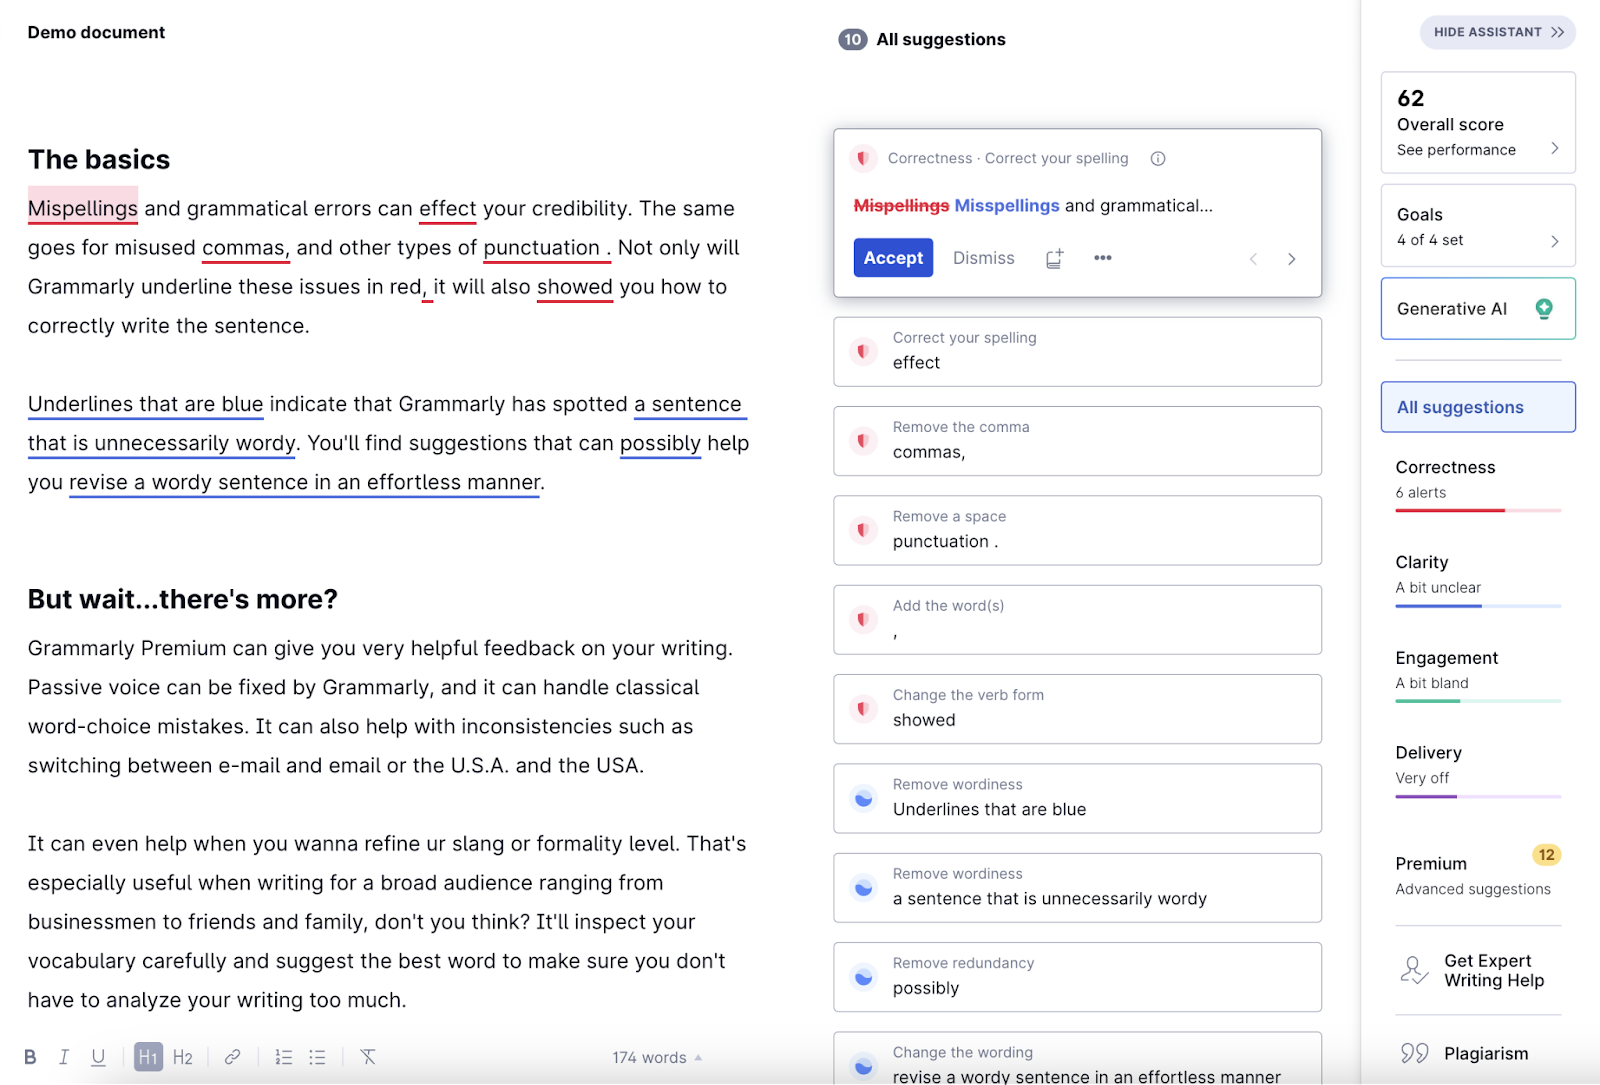 Grammarly's user interface, showing suggestions on how to improve the text